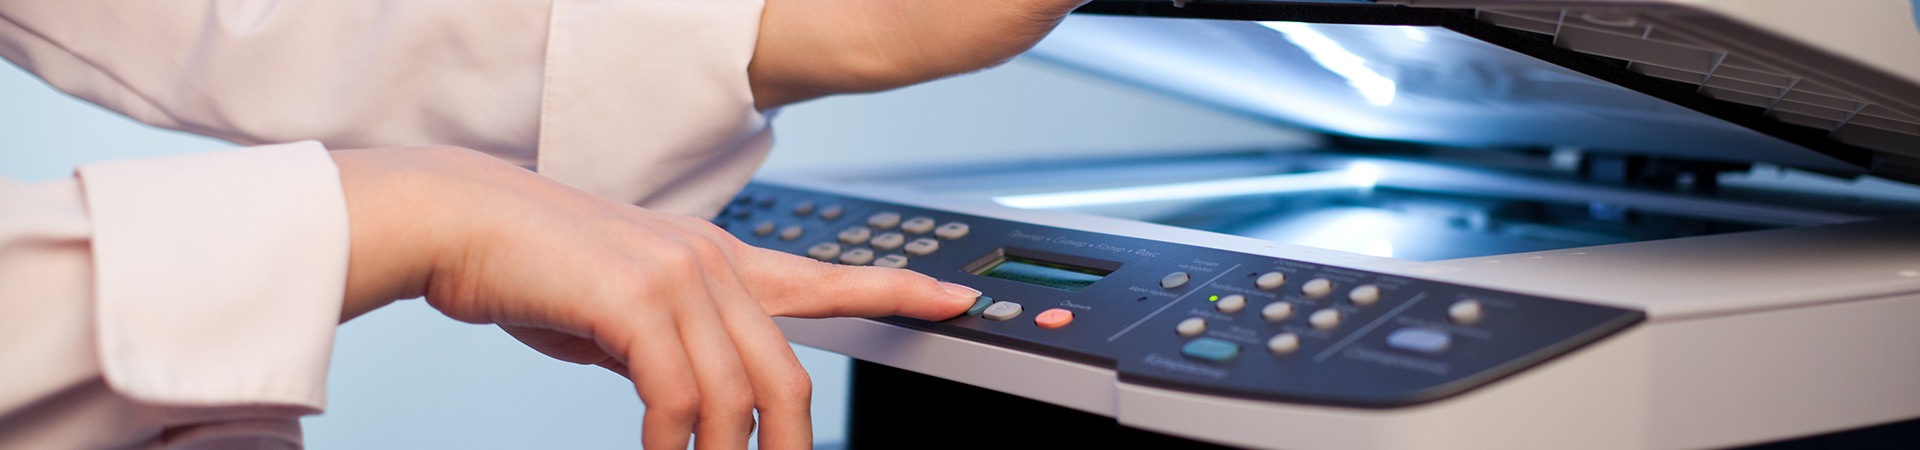 We offer a variety of scanners from Fujitsu, Xerox, HP and more.